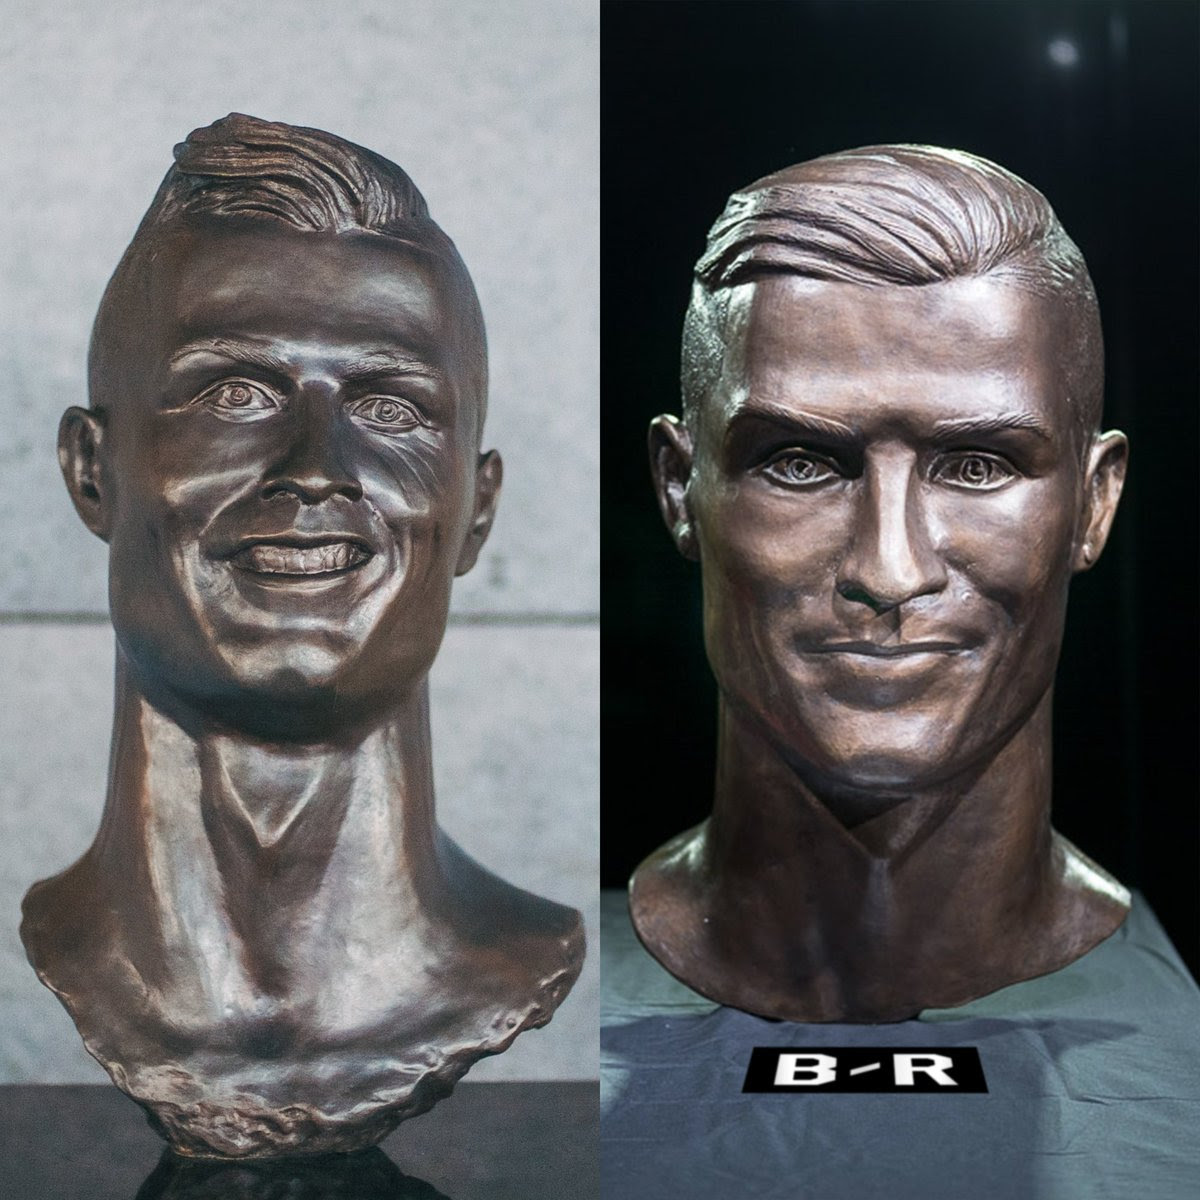 Cristiano Ronaldo Statue : Cristiano Ronaldo Statue Erected in Portugal